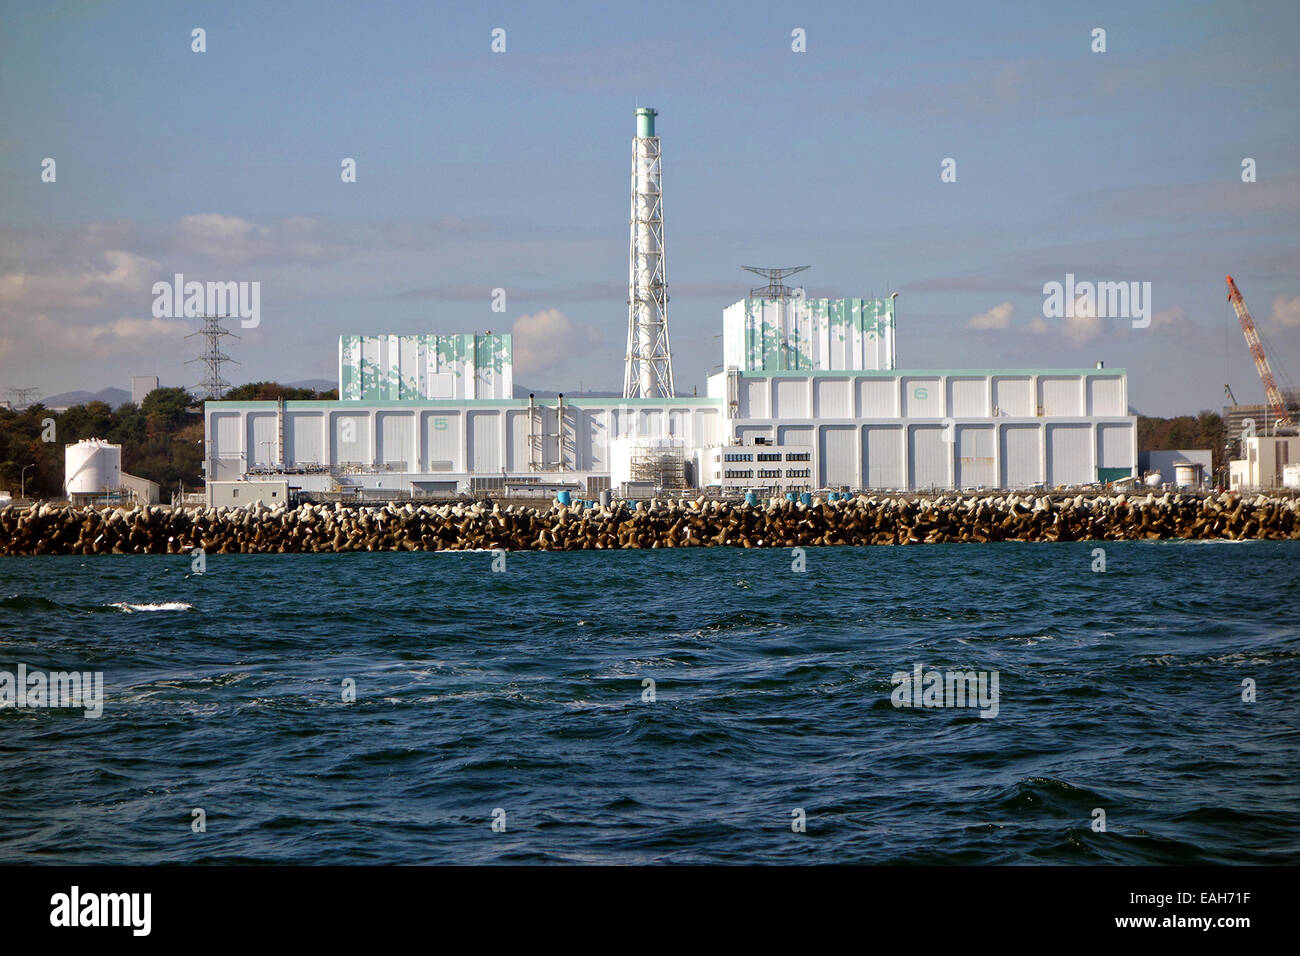 View from the water of the contaminated Fukushima Daiichi Nuclear Power Station November 6, 2014 in Okuma, Japan. The plant suffered a catastrophic meltdown of three of the plant's six nuclear reactors in March 2011. Stock Photo